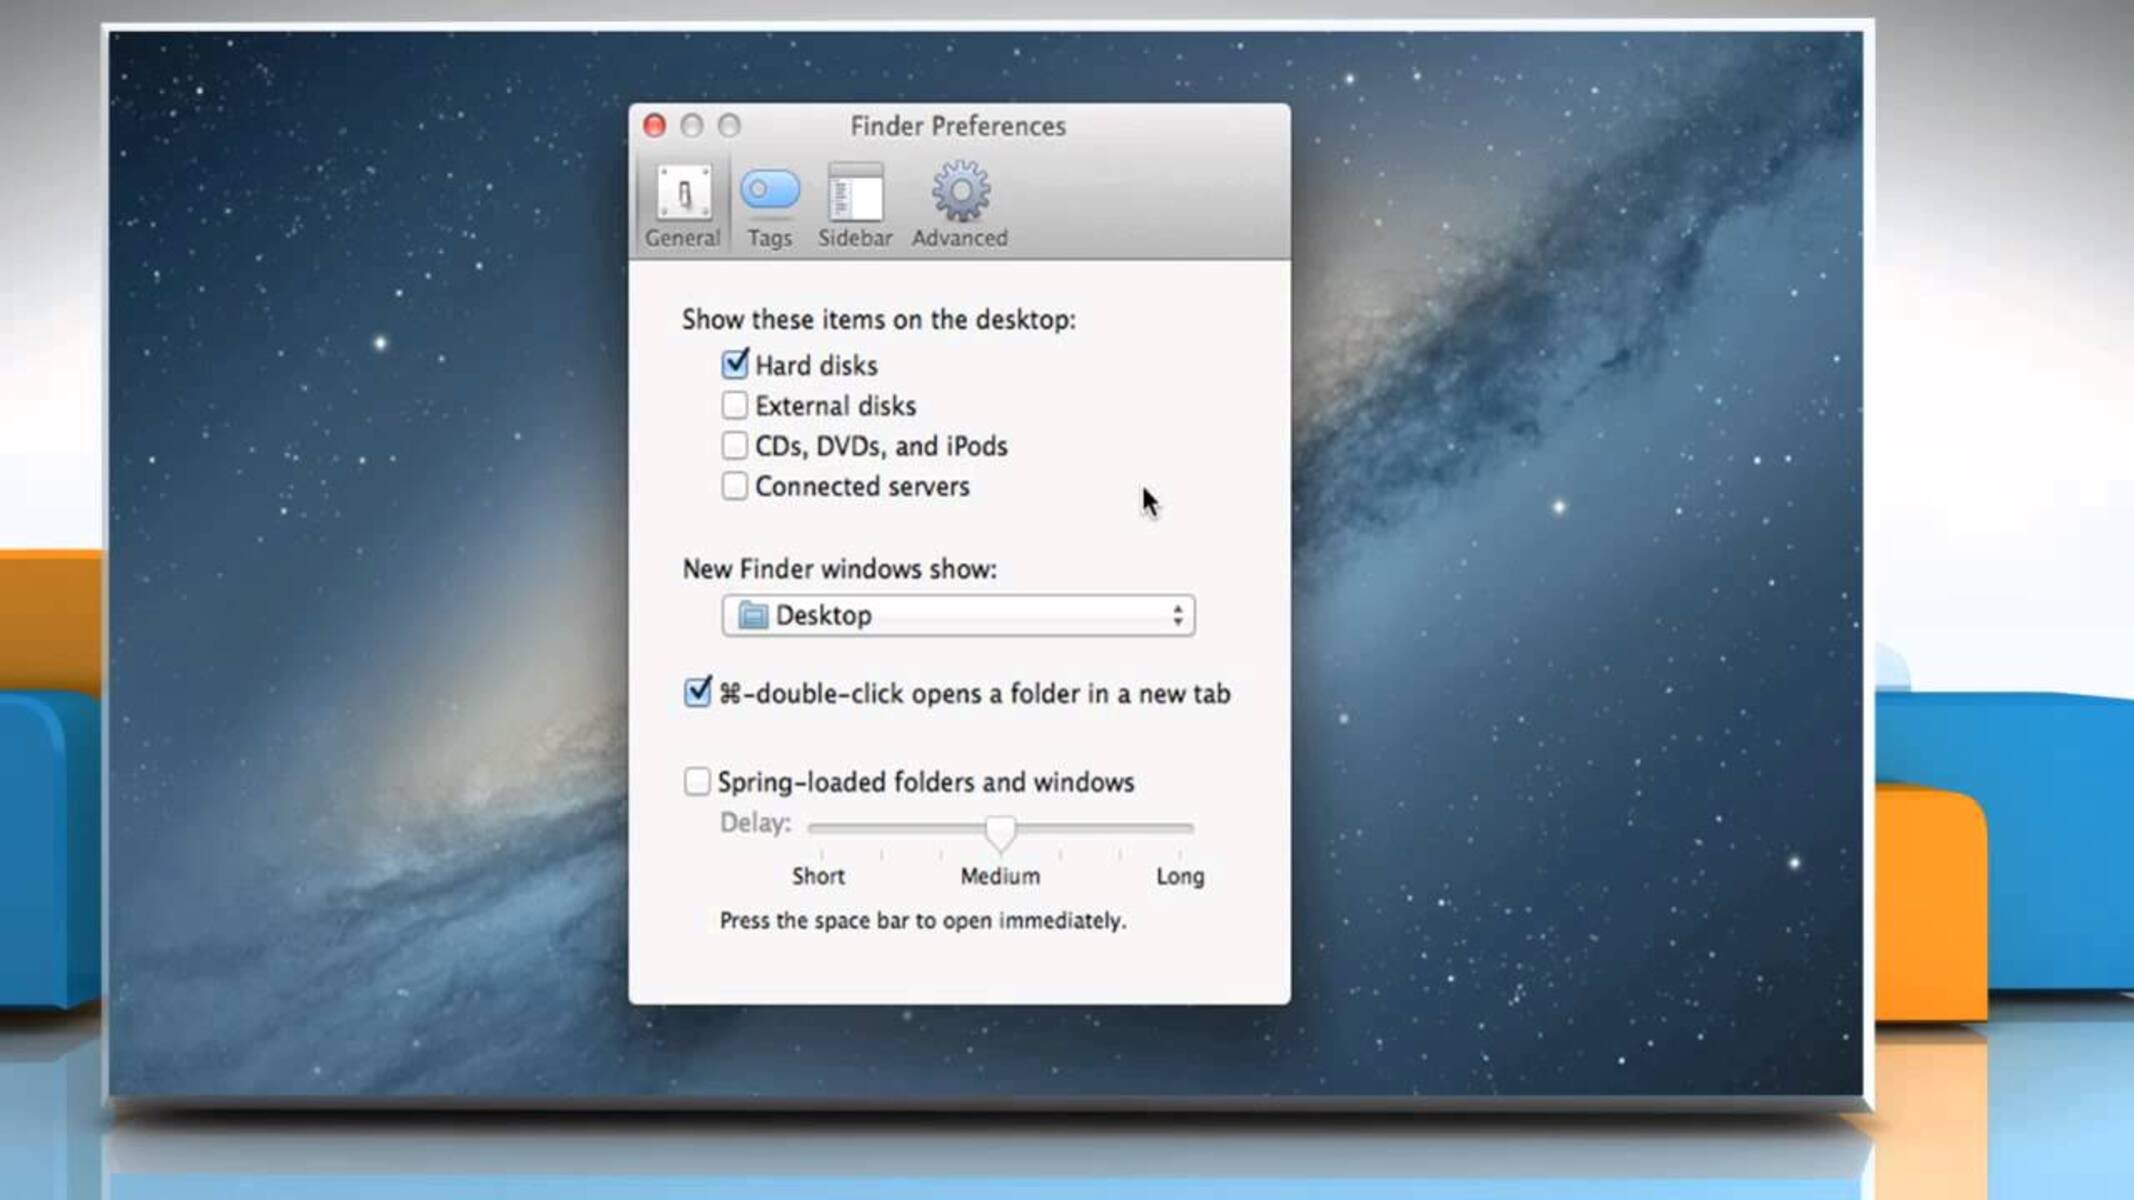 How To Configure The Finder’s Spring-Loaded Folders